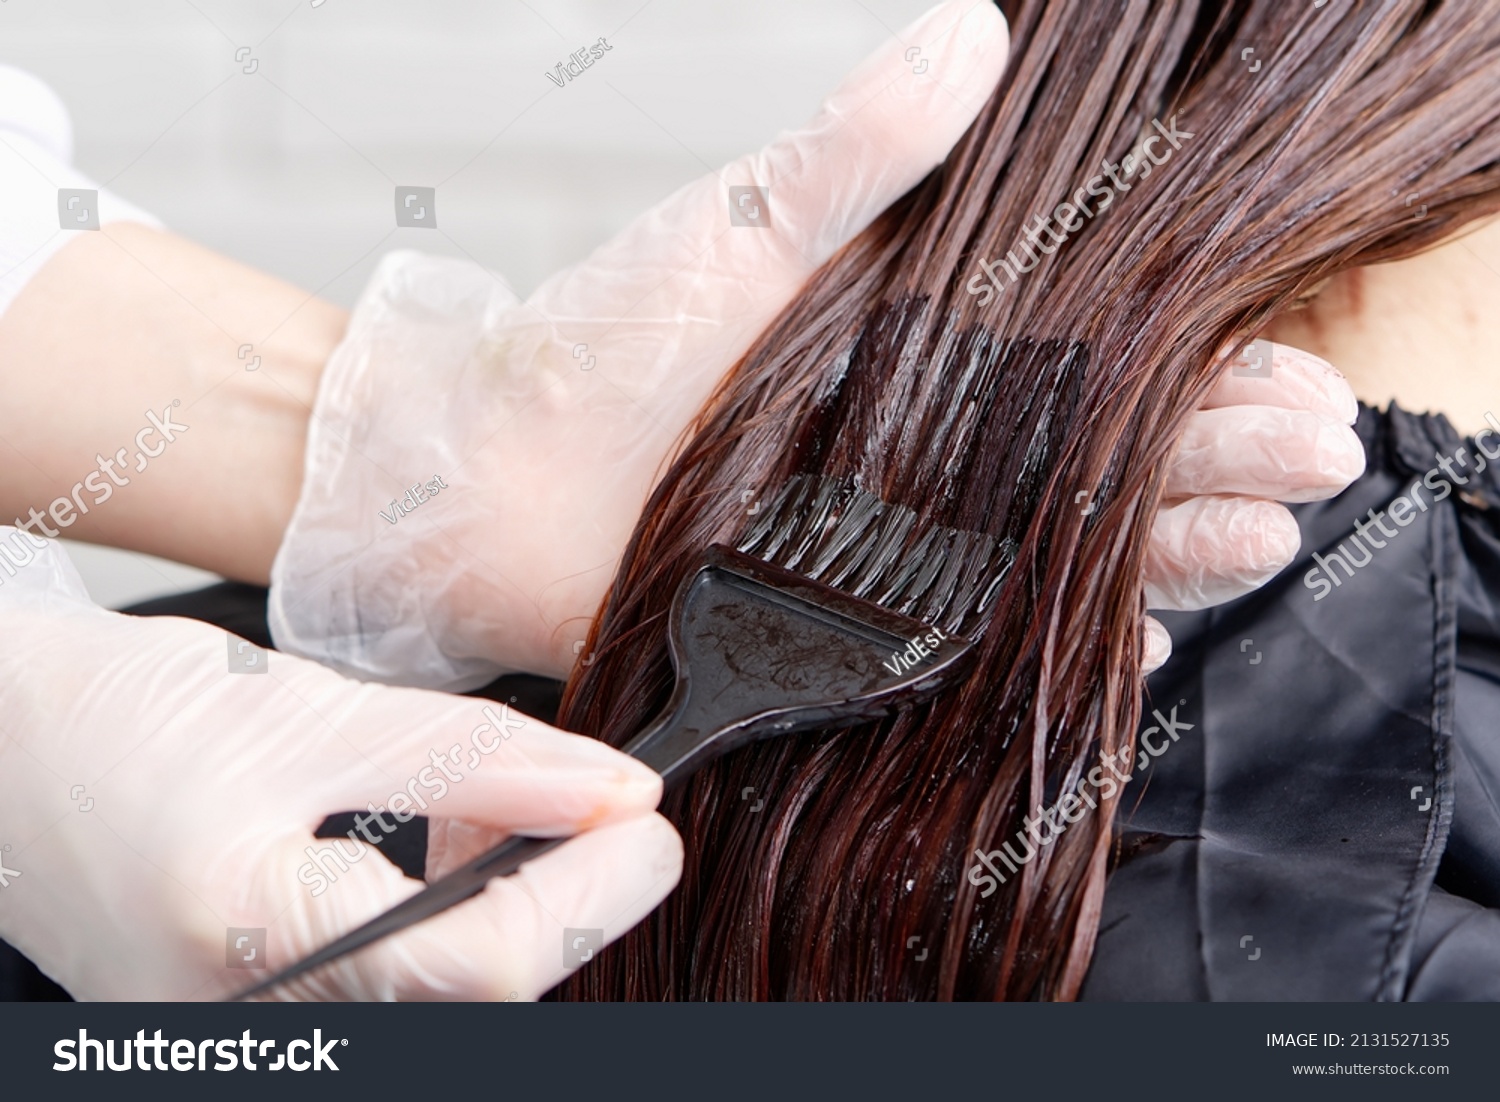 The hairdresser paints the woman's hair in a dark color, apply the paint to her hair. Getting beauty procedures. Barber hair dye is applied with a brush #2131527135